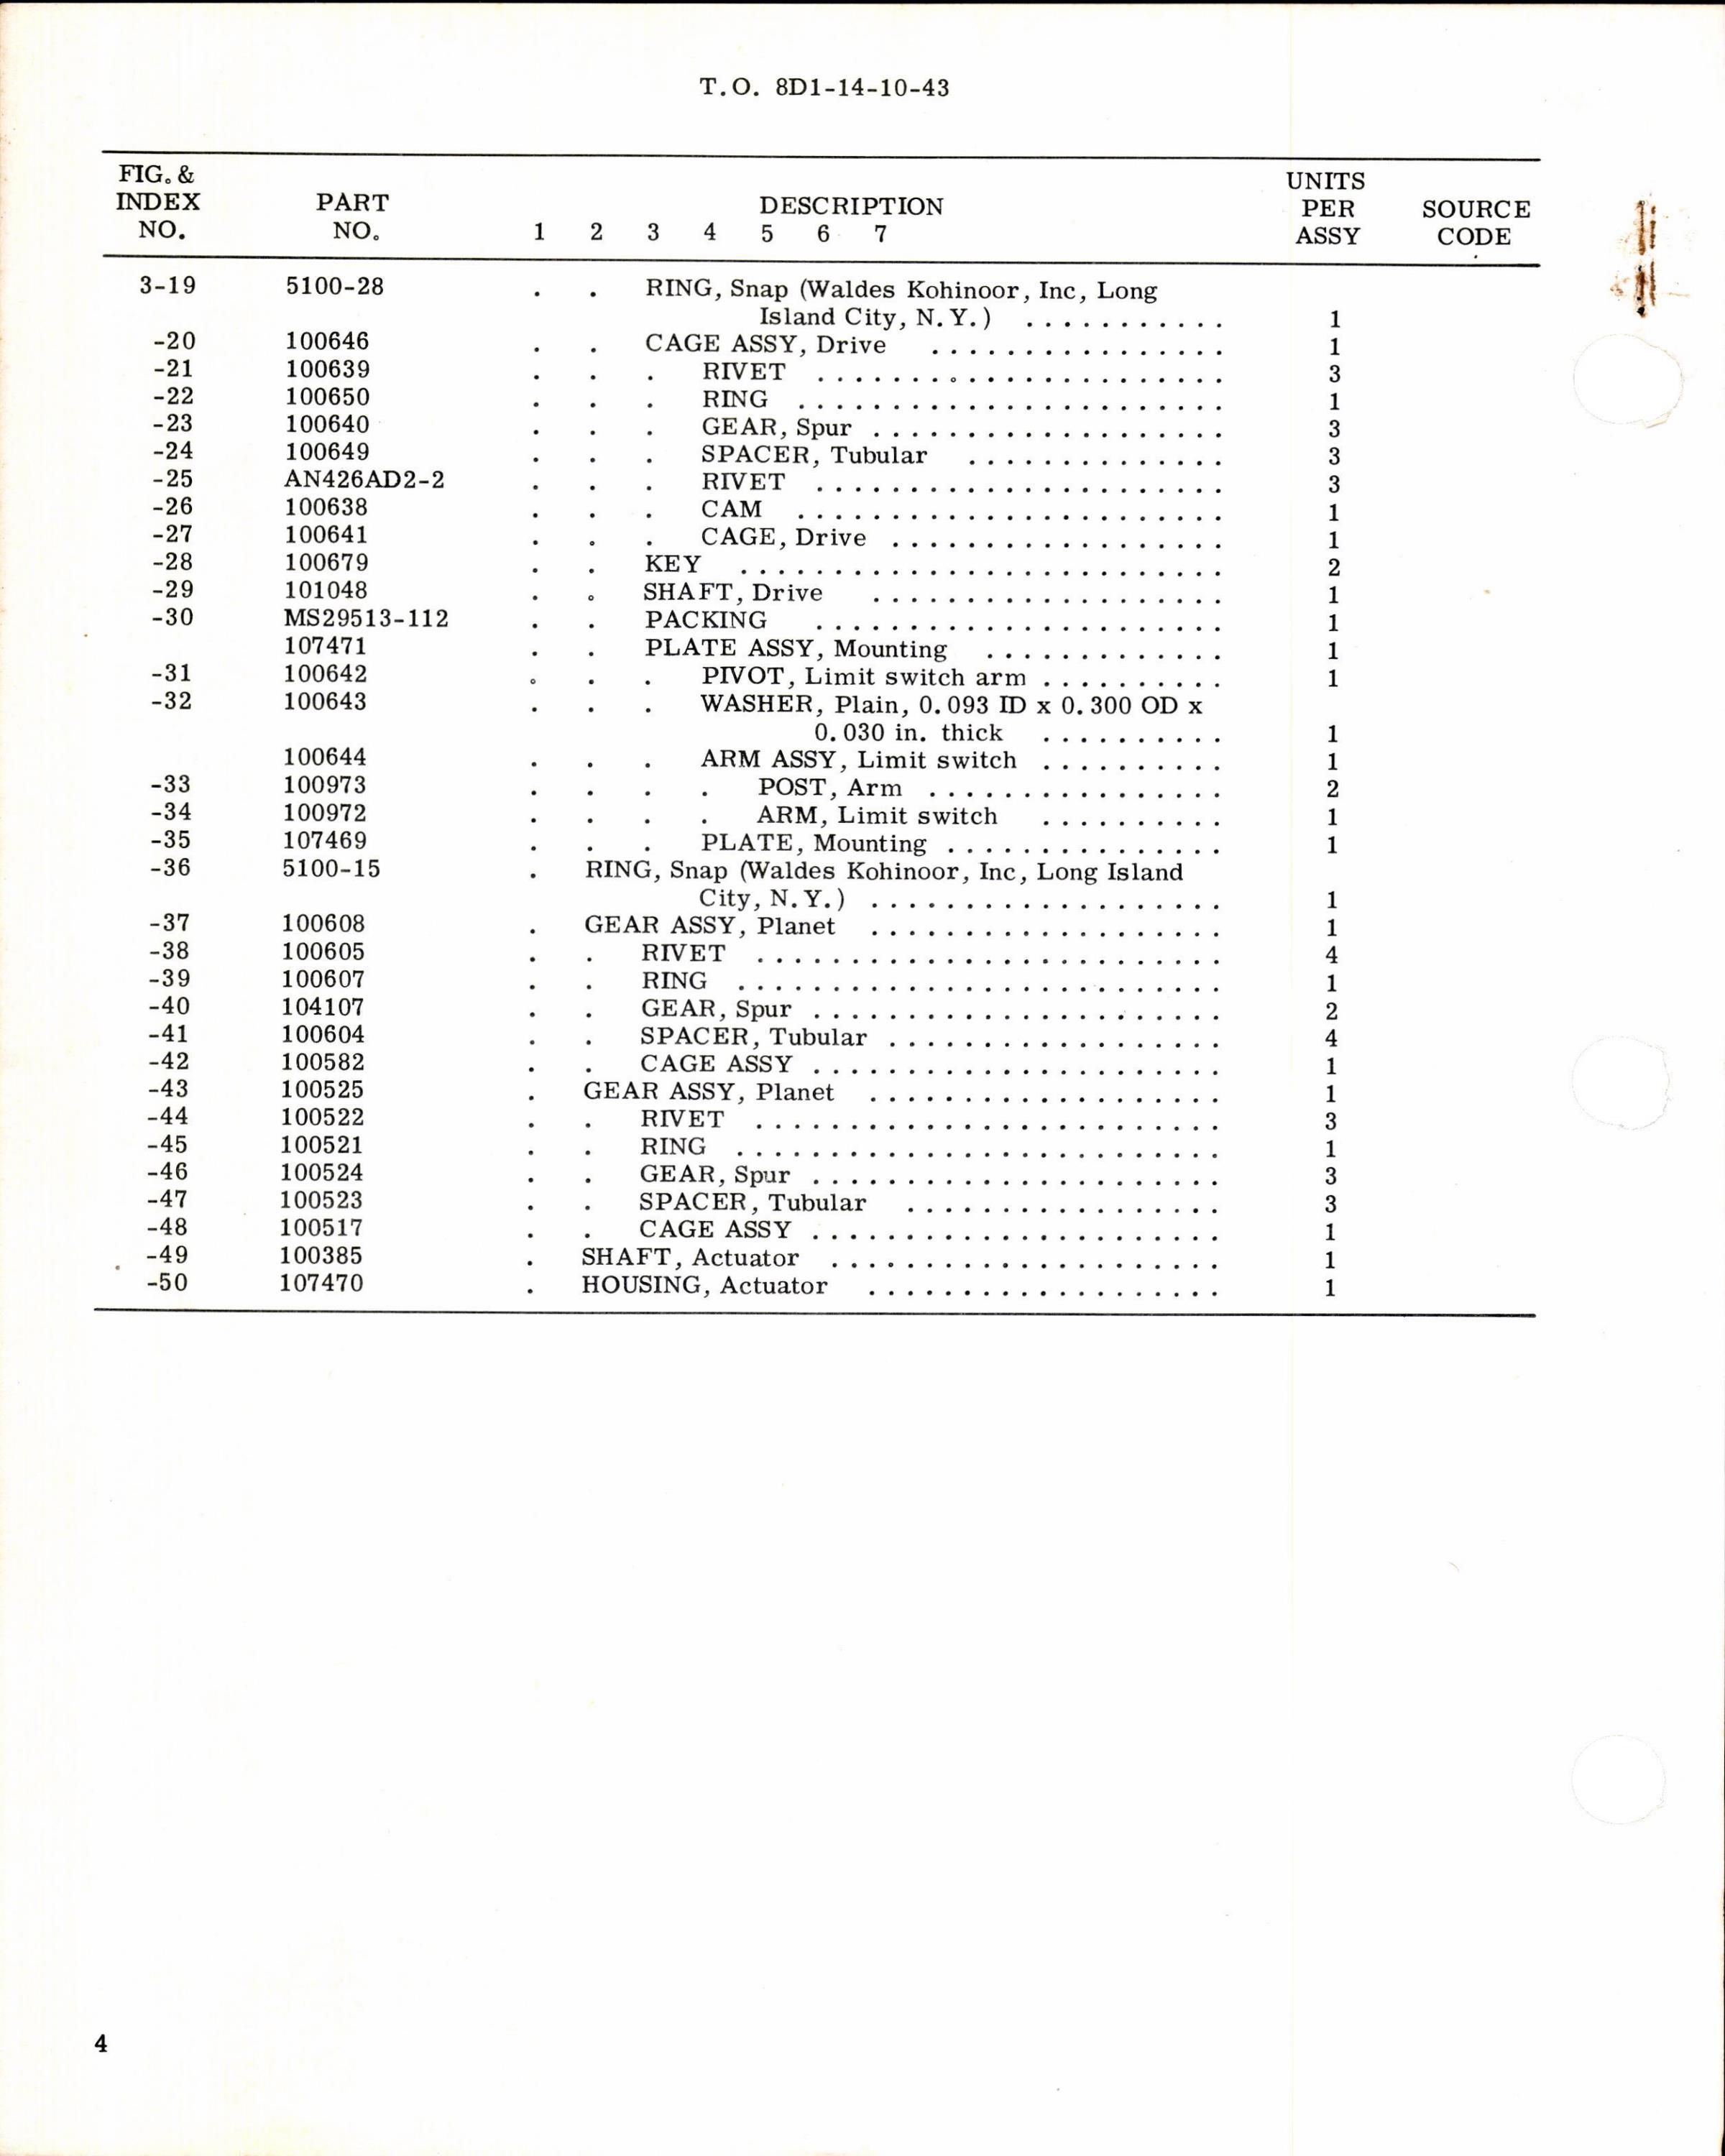 Sample page 4 from AirCorps Library document: Instructions w Parts Breakdown for Actuator Assembly Part 106690